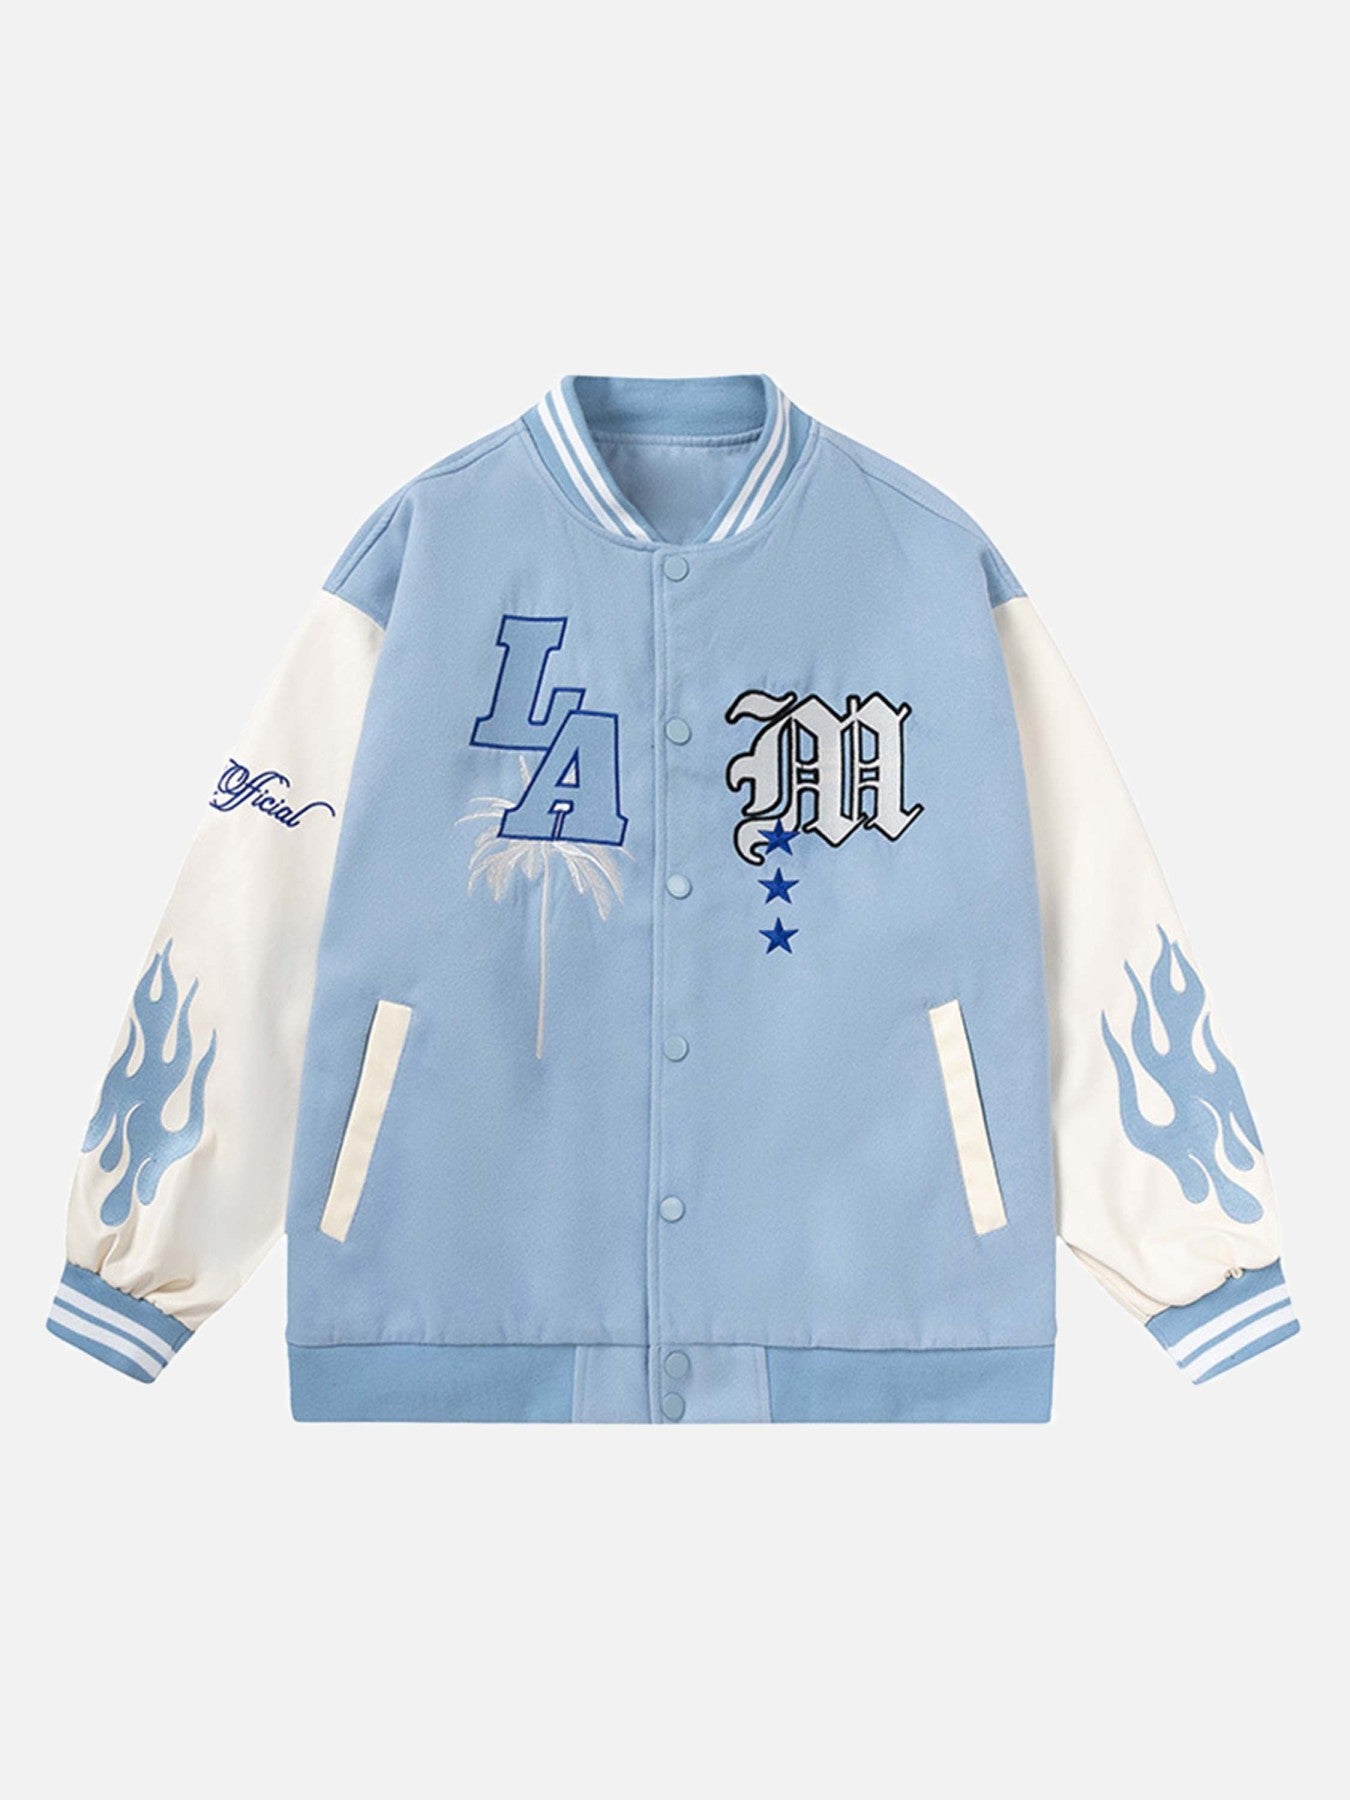 The Supermade Alphabet Embroidery Flame Baseball Jerseys